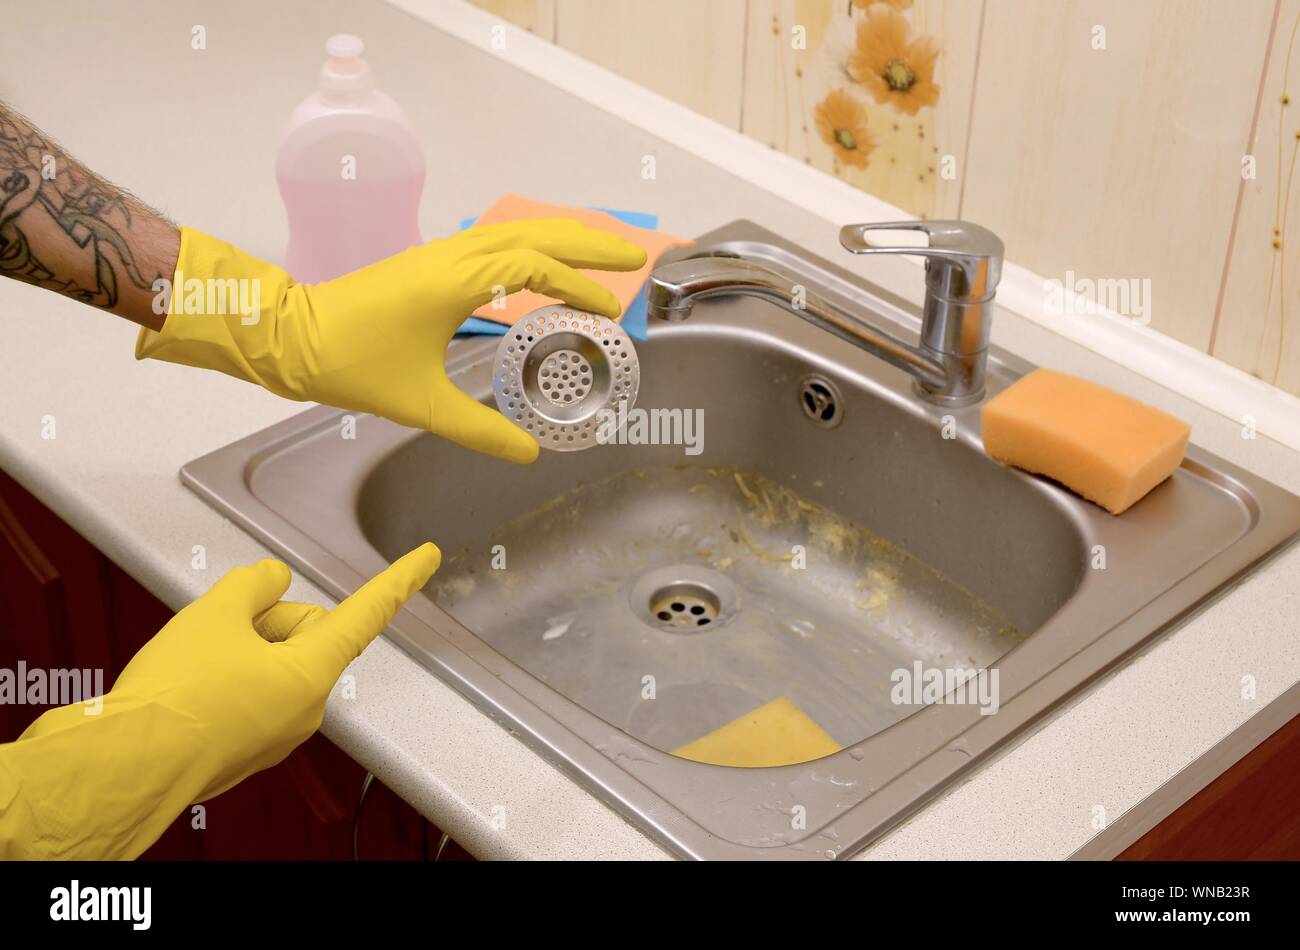 How To Clean Your Kitchen Sink Like A Pro With Images Cleaning